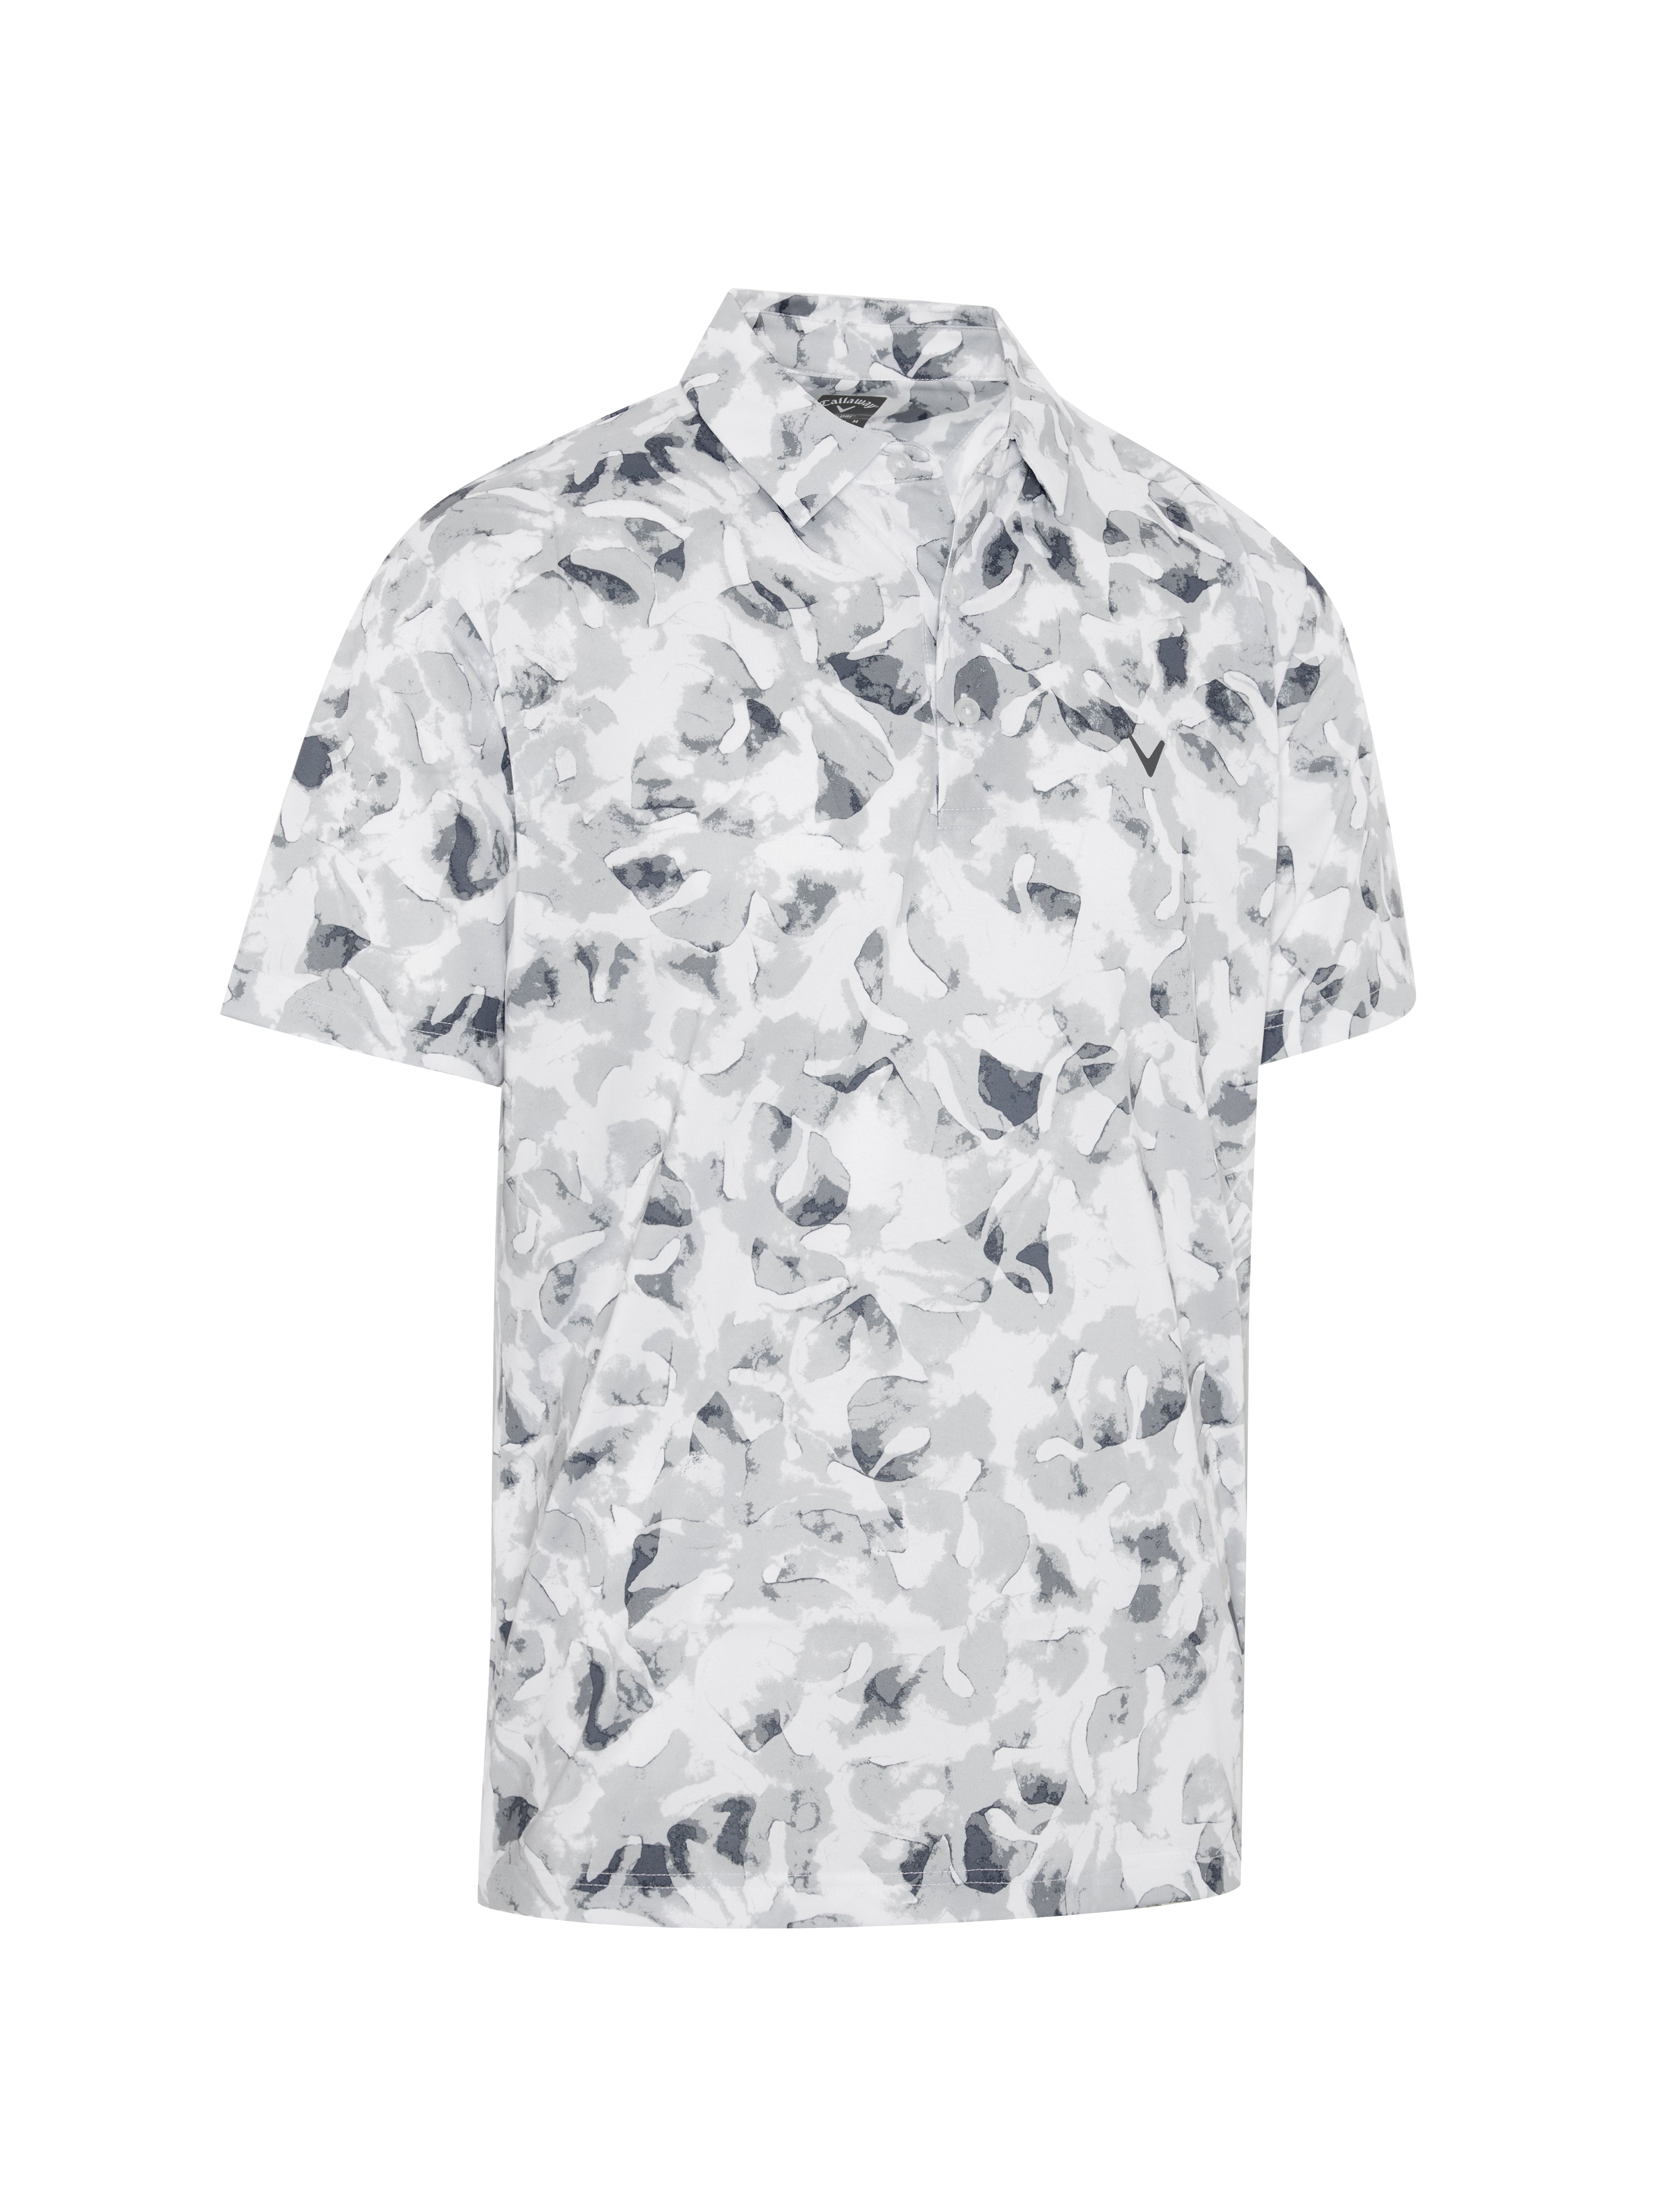 View All Over Tye Dye Golf Print Polo Shirt In Bright White And Flint Stone information